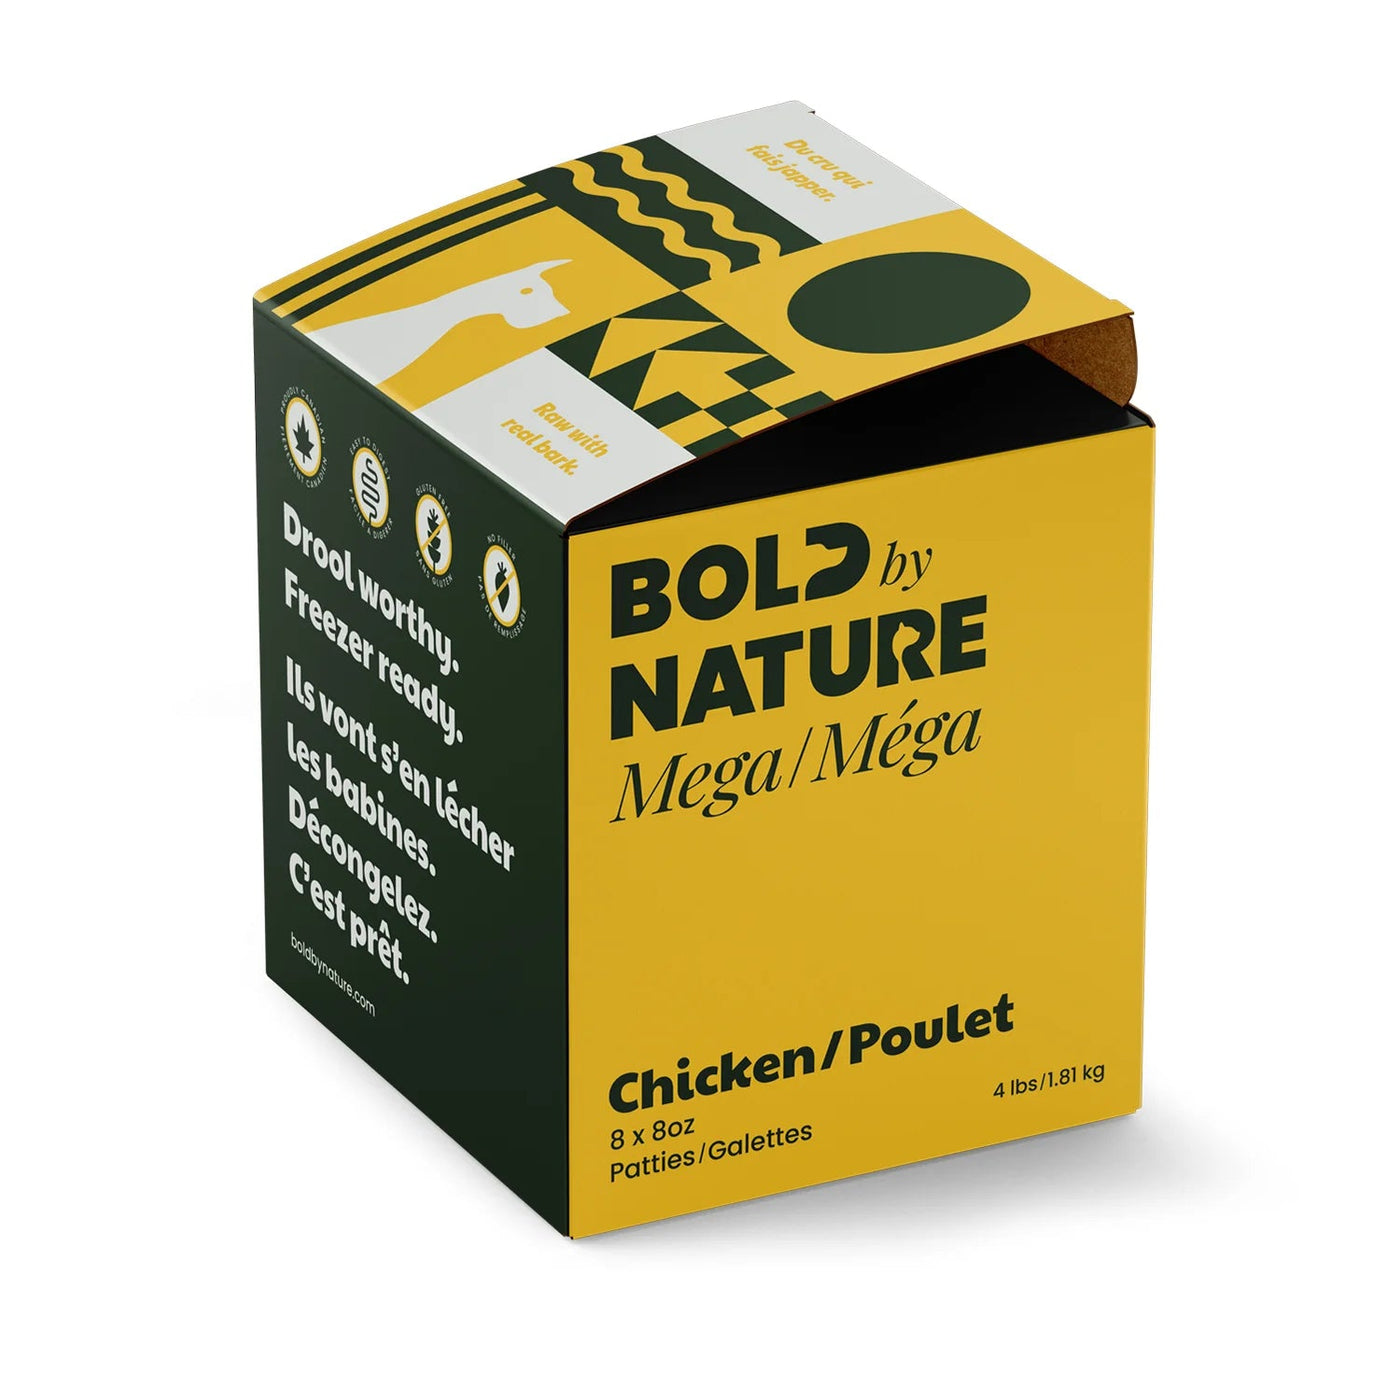 Mega Chicken for Dogs - Bold By Nature